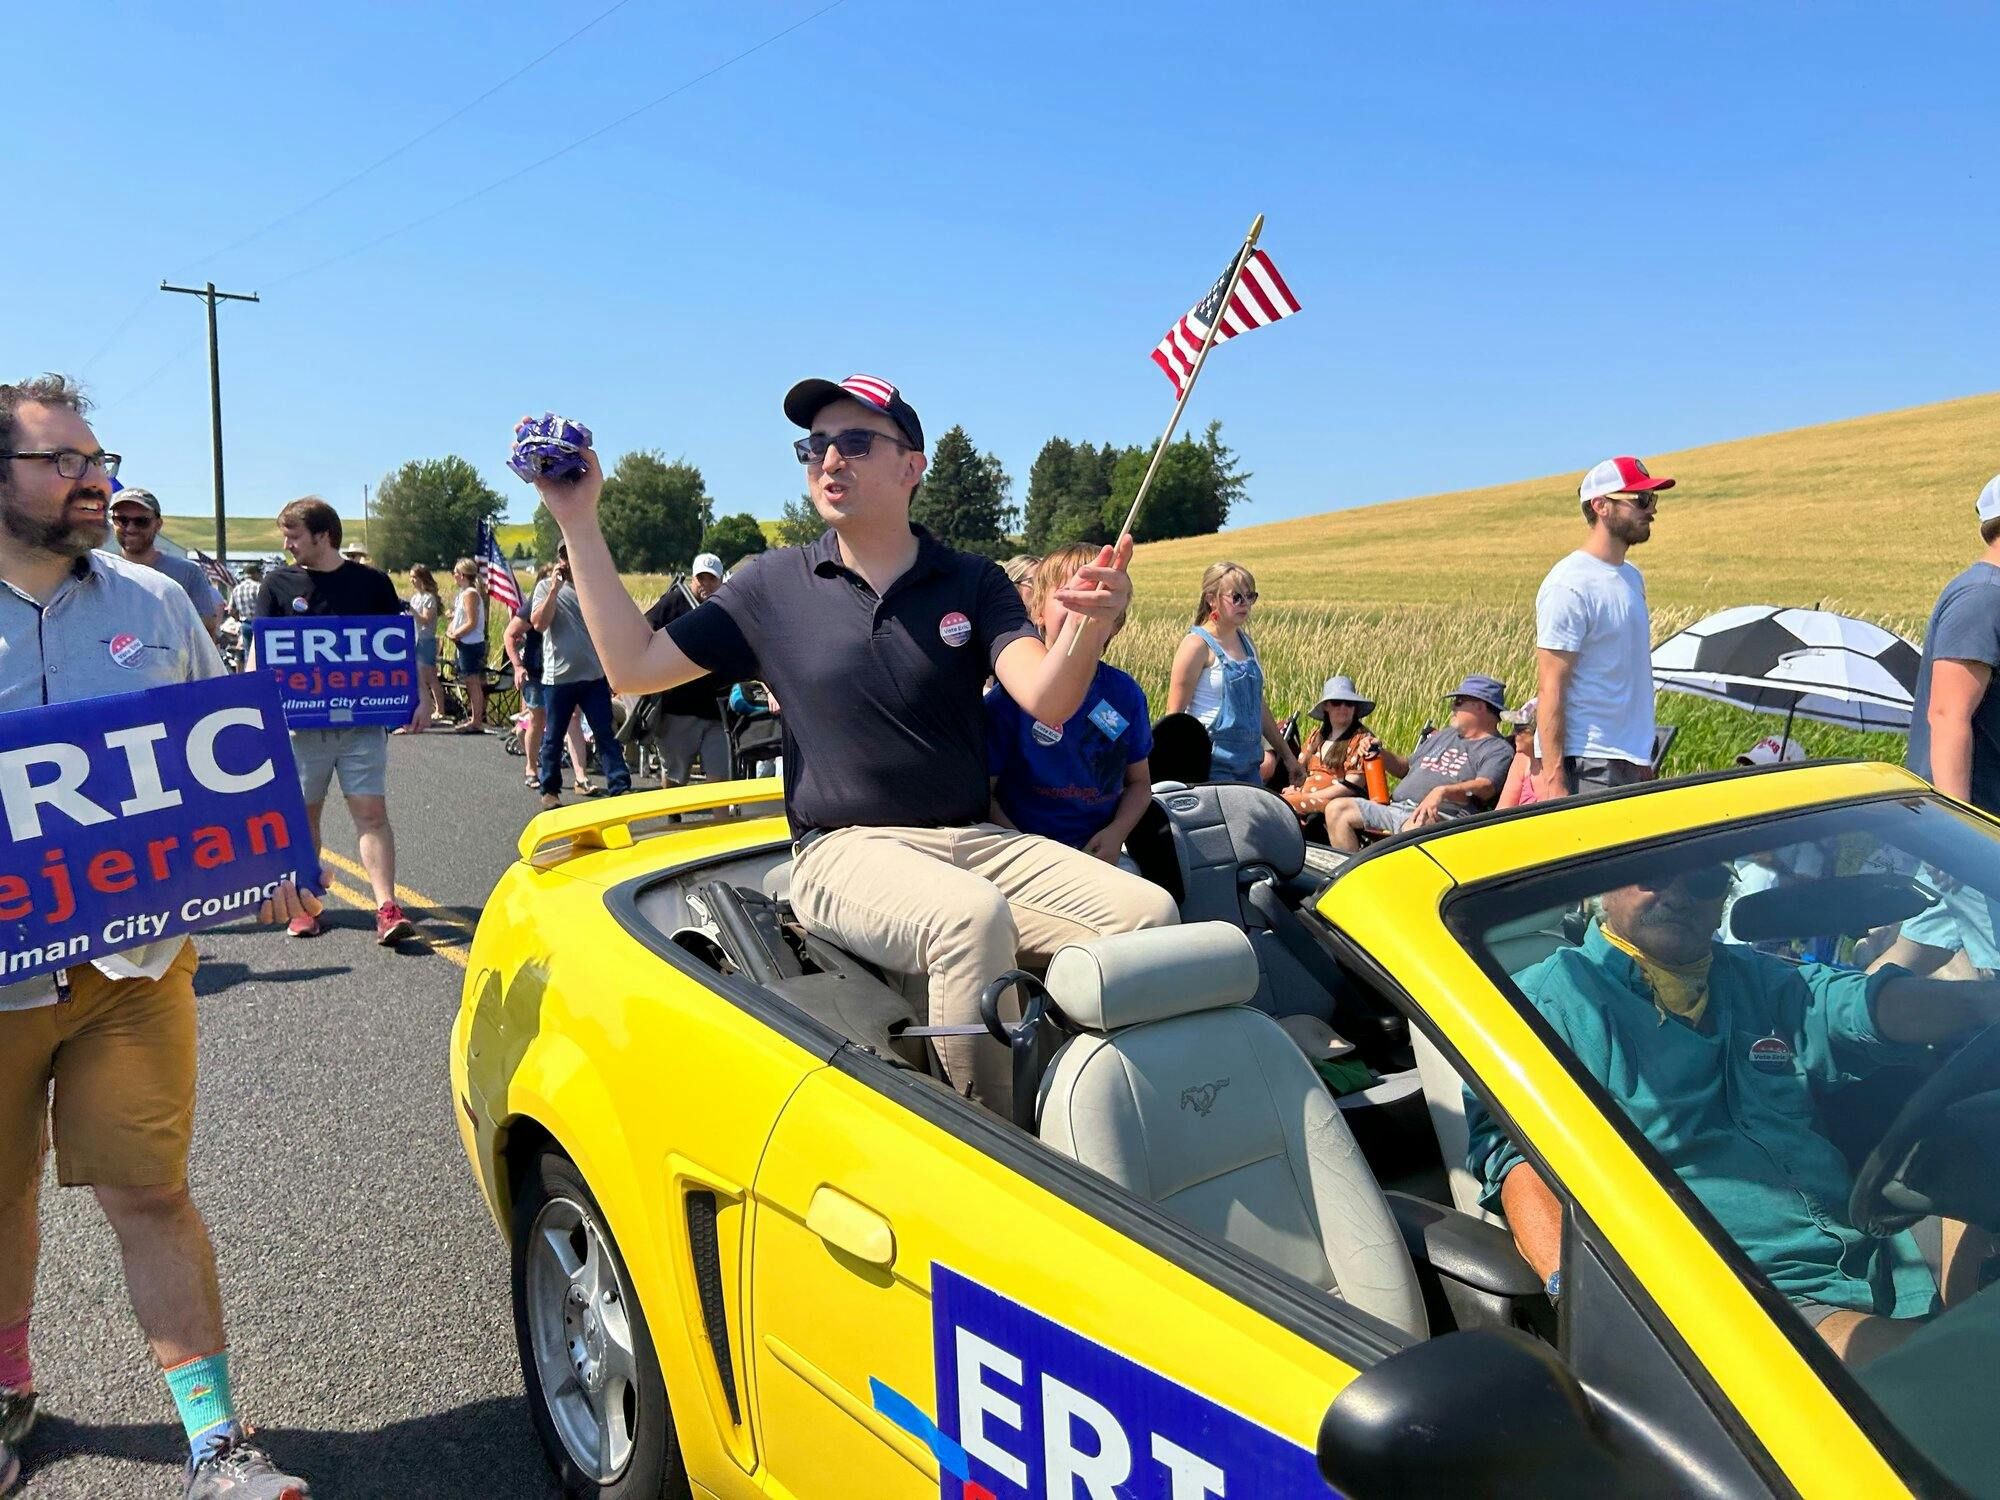 Eric Fejeran for Pullman City Council campaign participating in a 4th July parade.